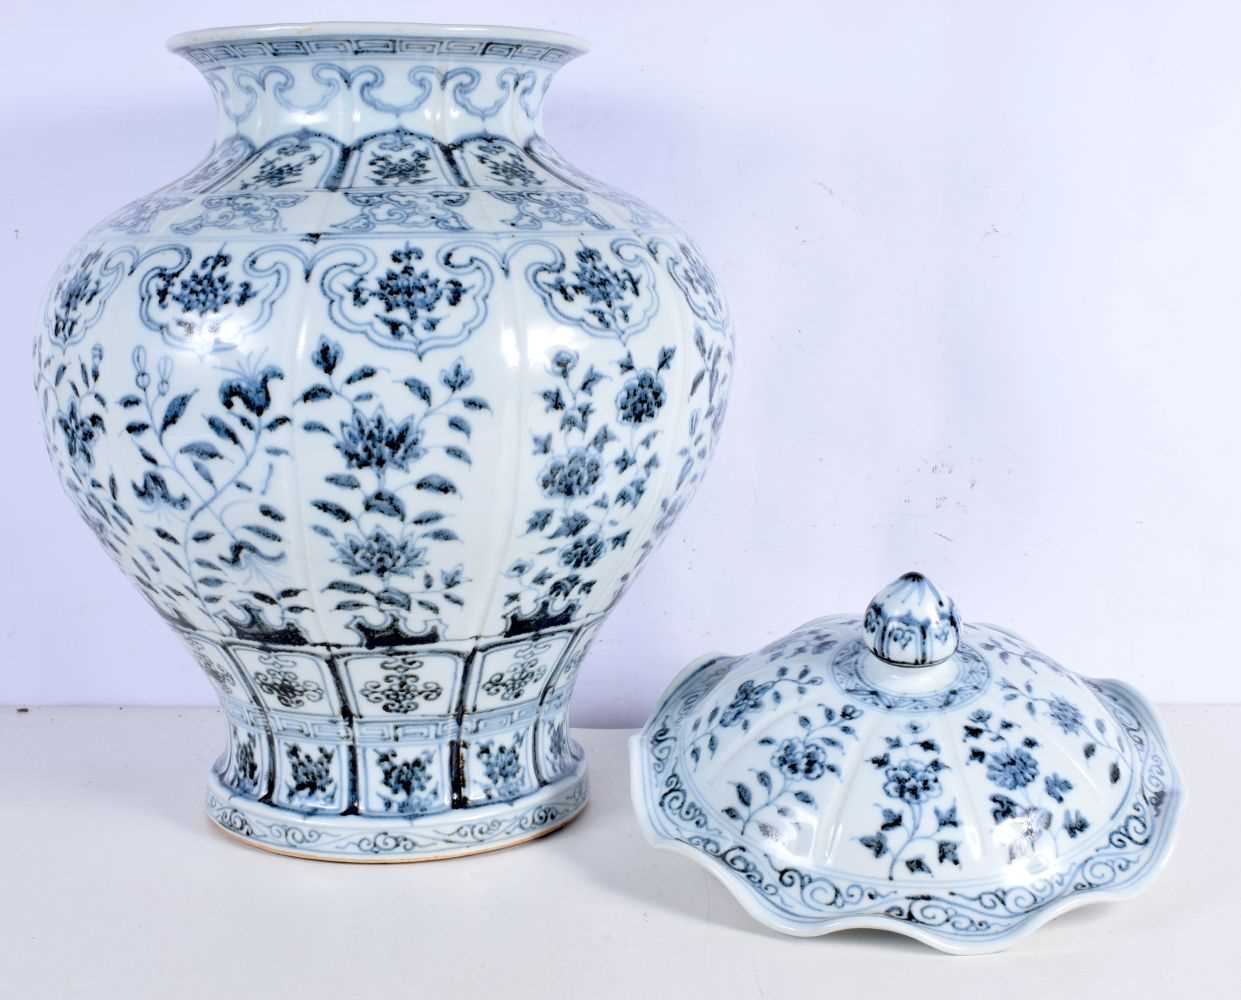 A large Chinese Porcelain blue and white Jar with cover decorative with a floral pattern 55 cm - Image 3 of 6